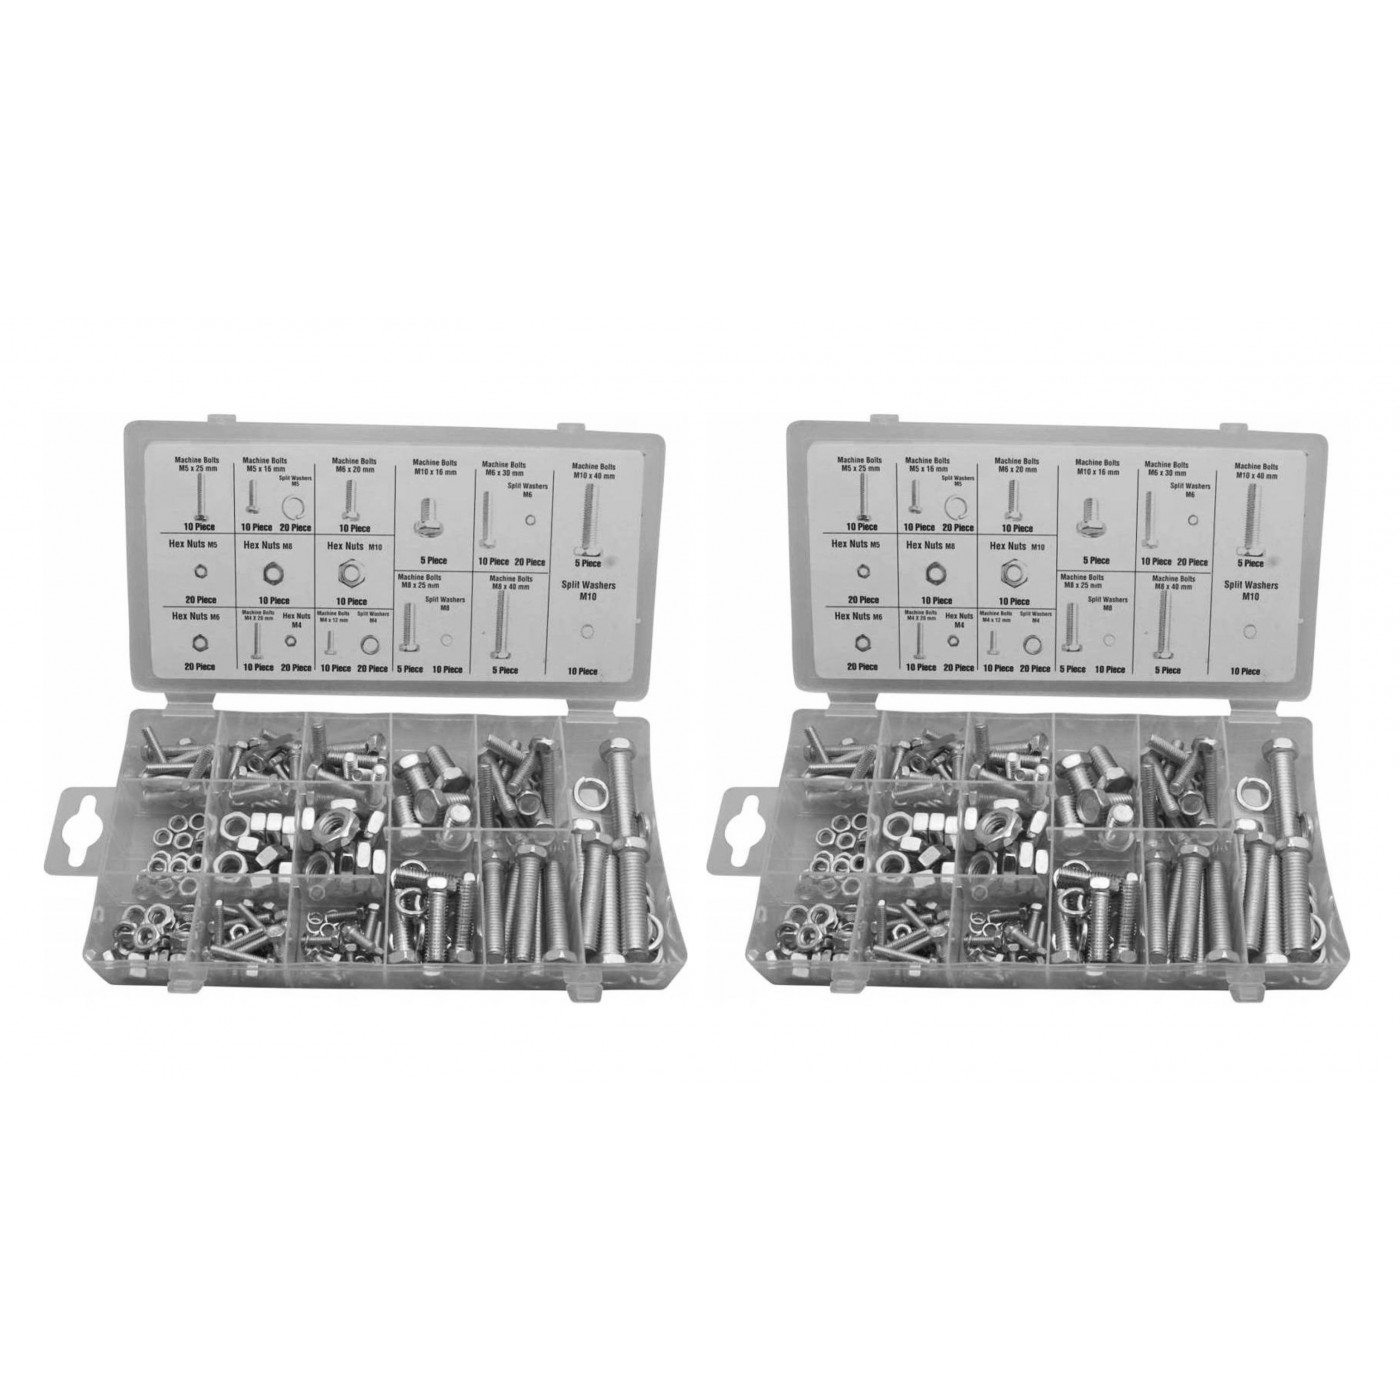 Set of 480 pieces bolts, nuts and washers in box